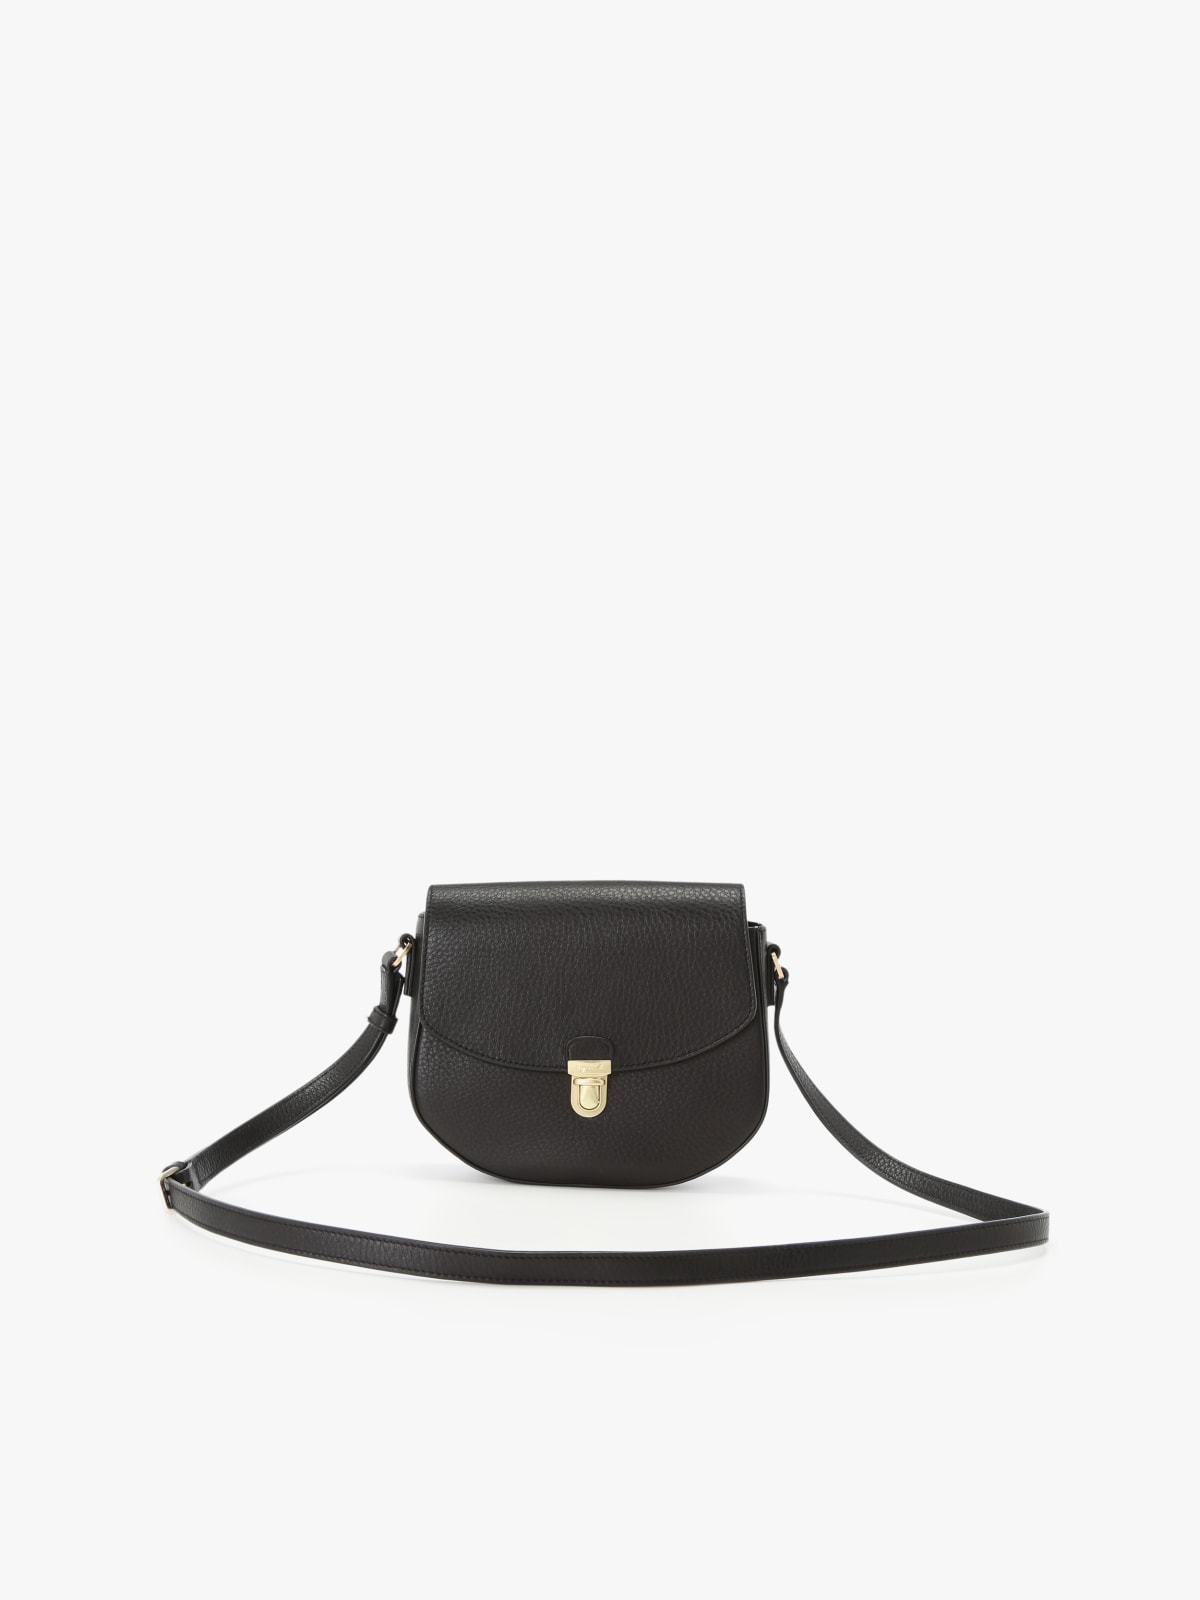 Grained leather horizontal bag